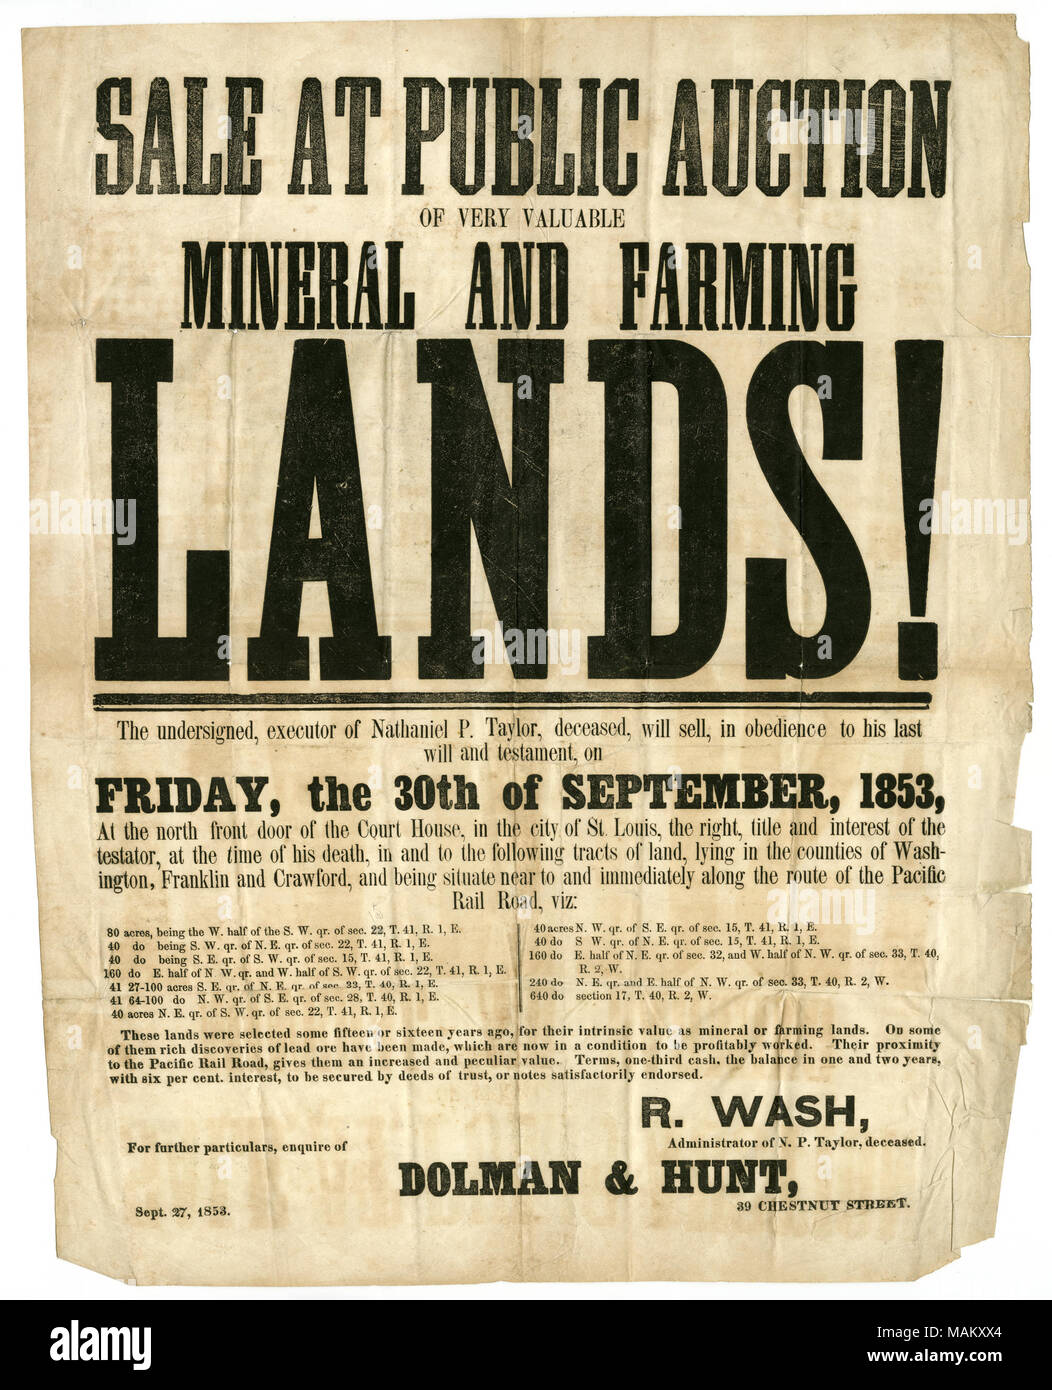 Lands are in Washington, Franklin, and Crawford Counties. R. Wash, administrator of estate. 'For further particulars enquire of Dolman and Hunt, 39 Chestnut Street.' Title: Announcement of sale of lands from the estate of Nathaniel P. Taylor, to be sold from the St. Louis Courthouse, September 27, 1853  . 27 September 1853. Wash, Robert, 1790-1856 Stock Photo